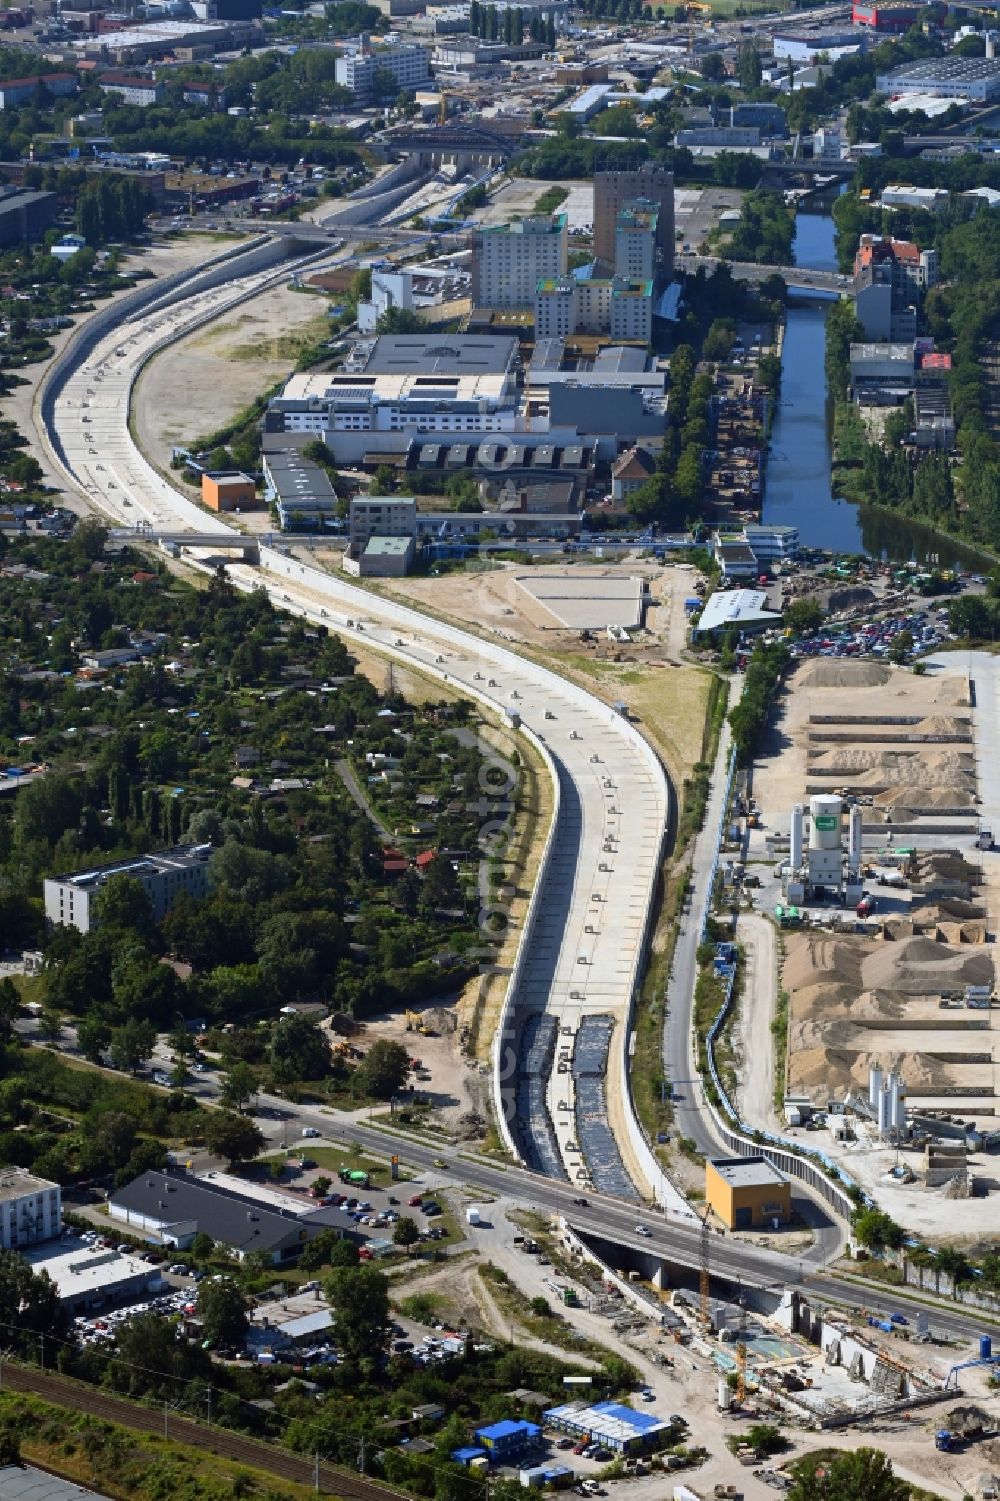 Aerial photograph Berlin - Civil engineering construction sites for construction of the extension of the urban motorway - Autobahn Autobahn A100 in Berlin Neukoelln